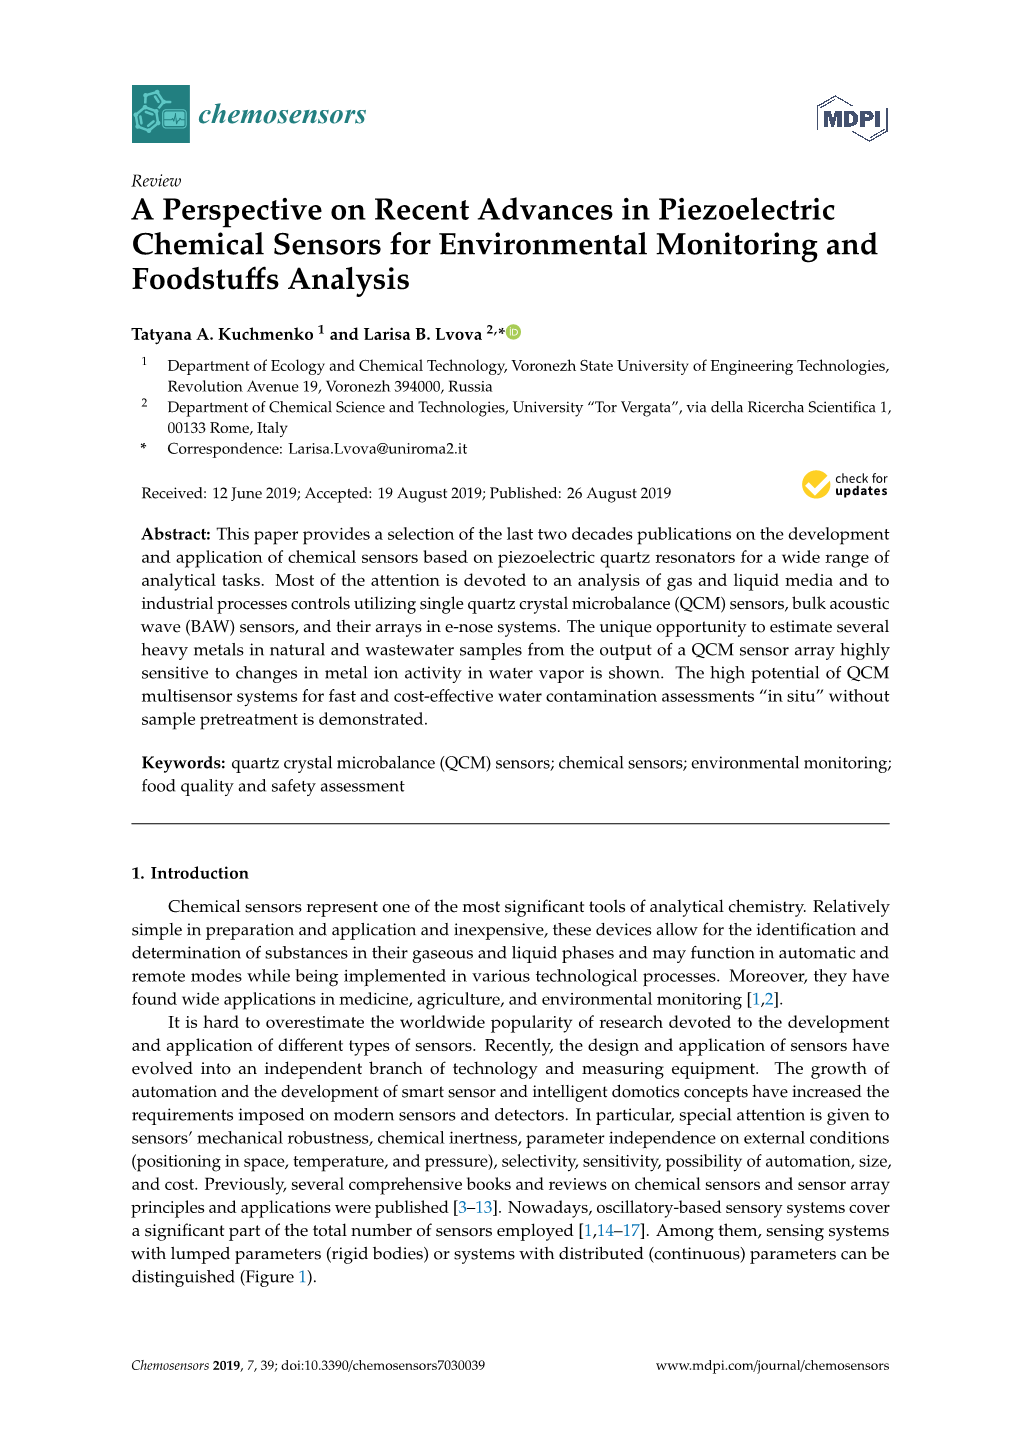 A Perspective on Recent Advances in Piezoelectric Chemical Sensors for Environmental Monitoring and Foodstuﬀs Analysis